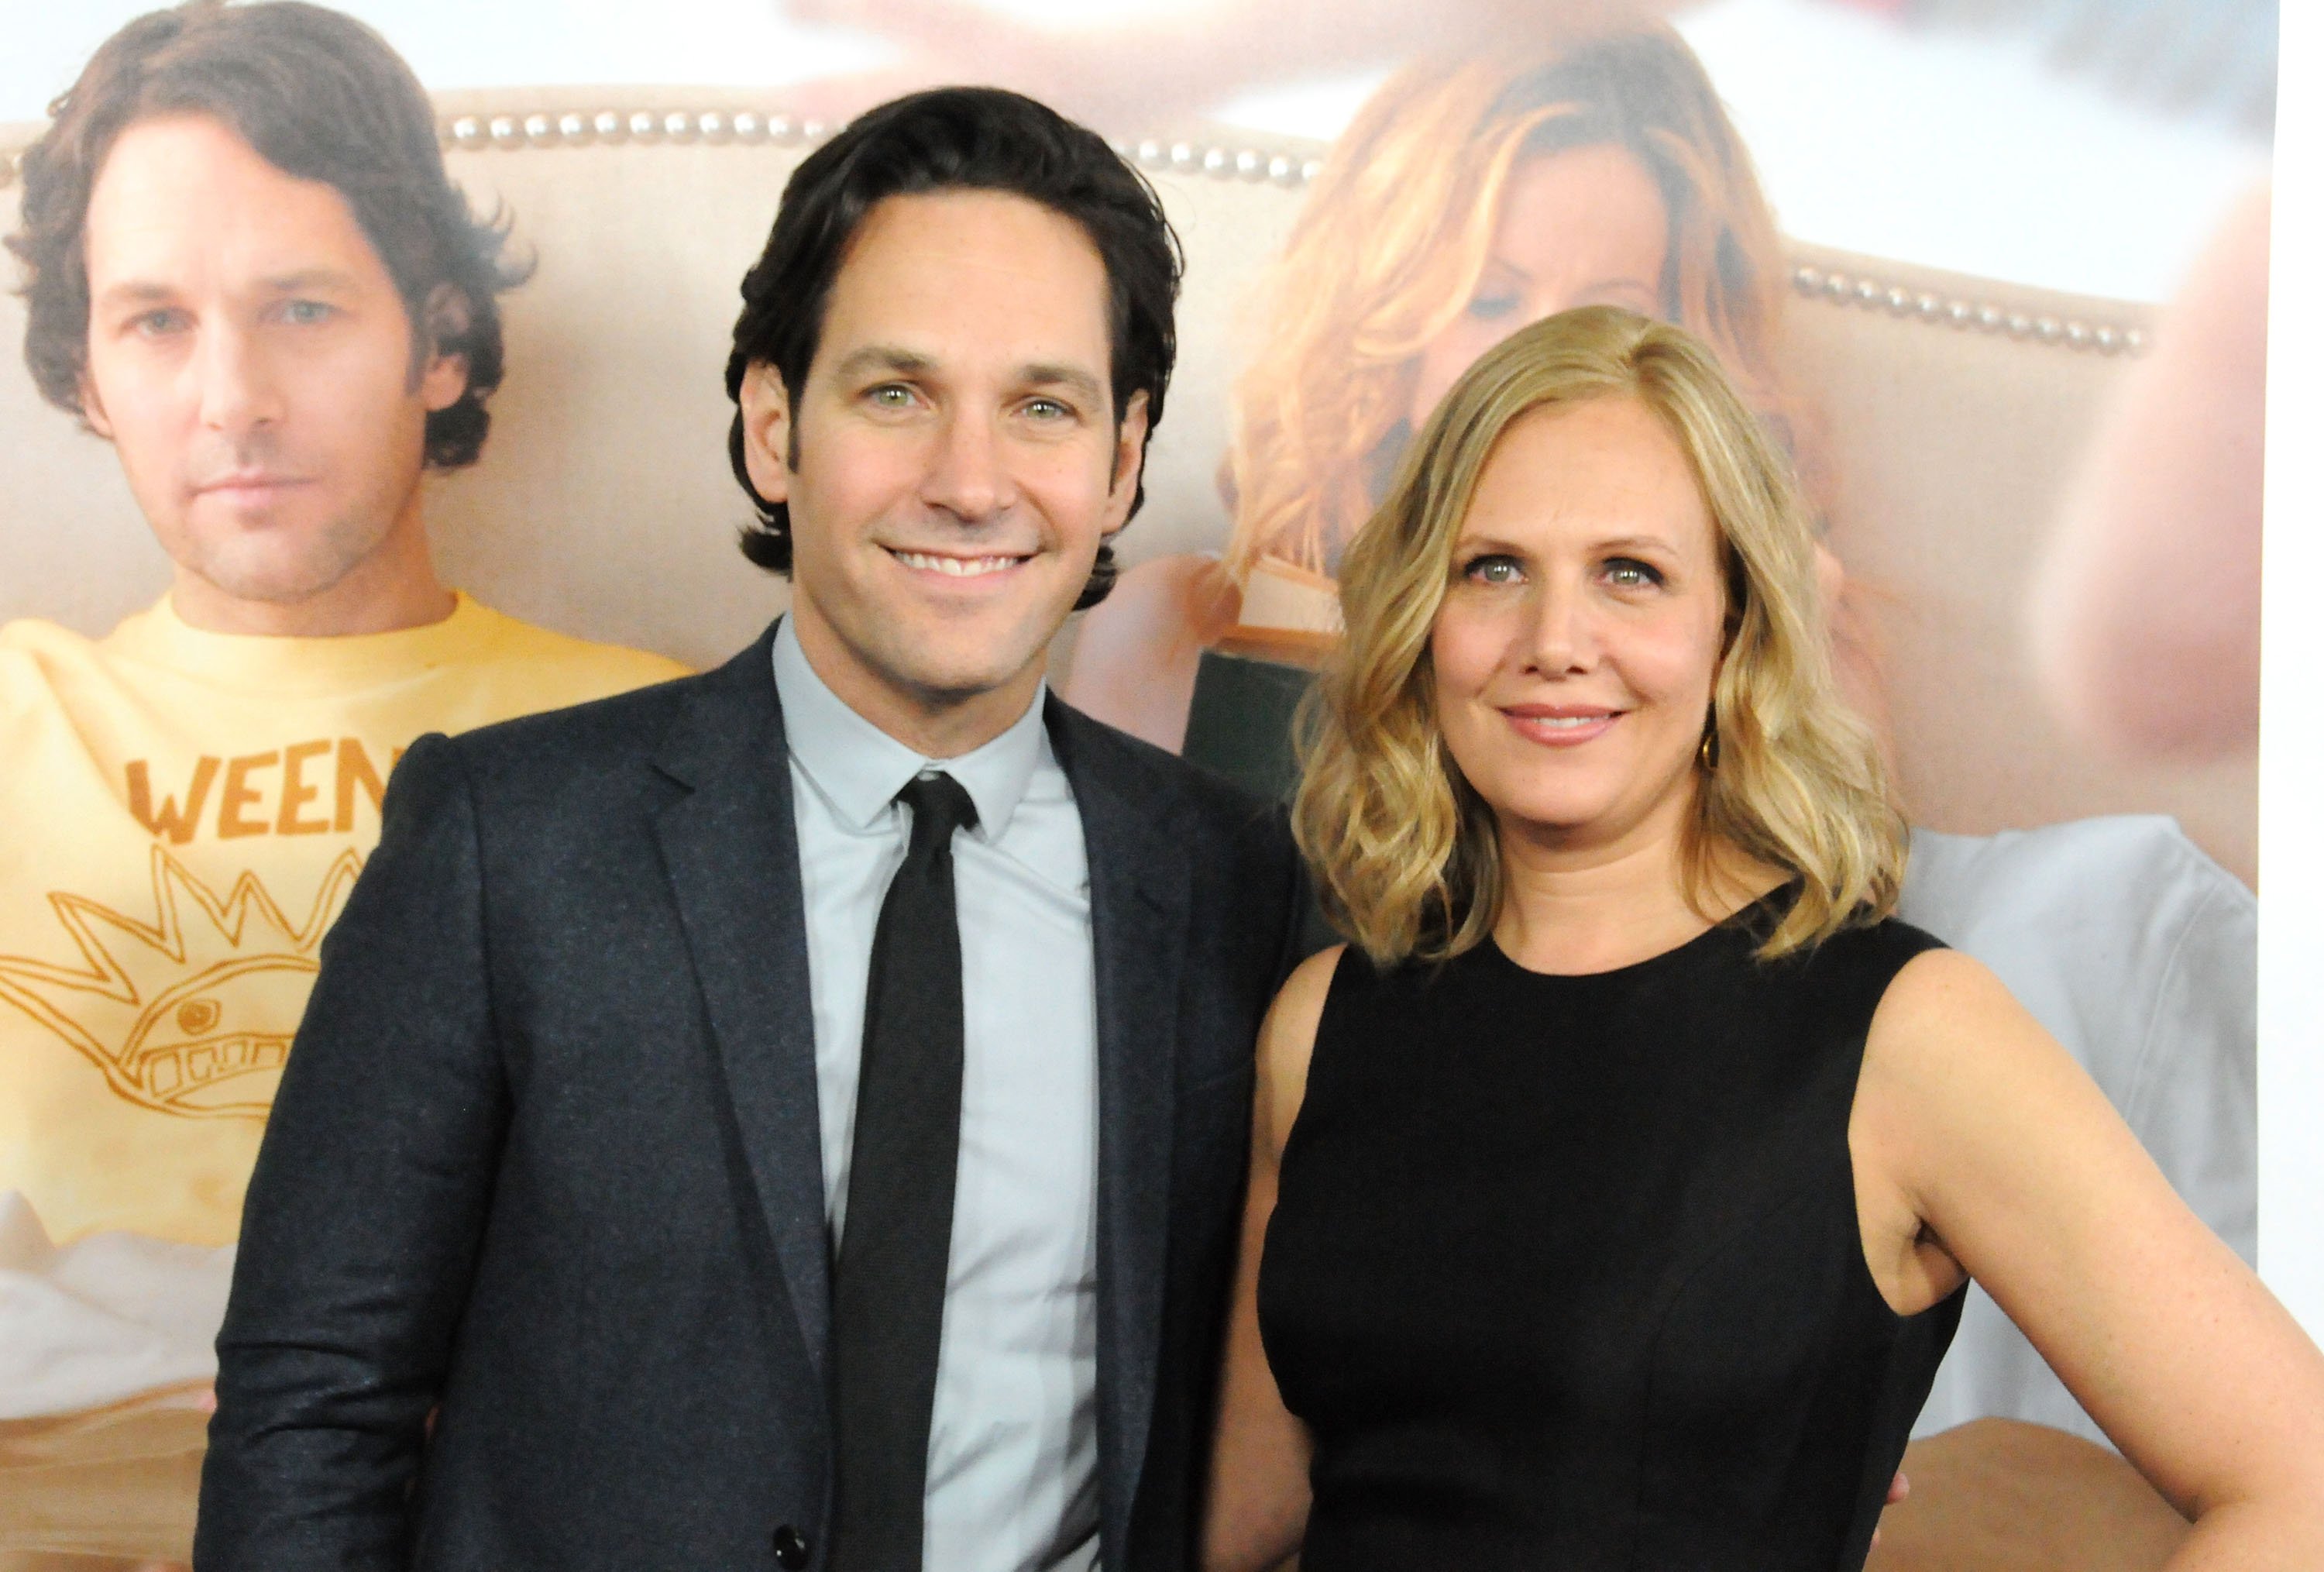 Paul Rudd and wife Julie Yaeger at Grauman's Chinese Theatre on December 12, 2012, in Hollywood, California. | Source: Getty Images